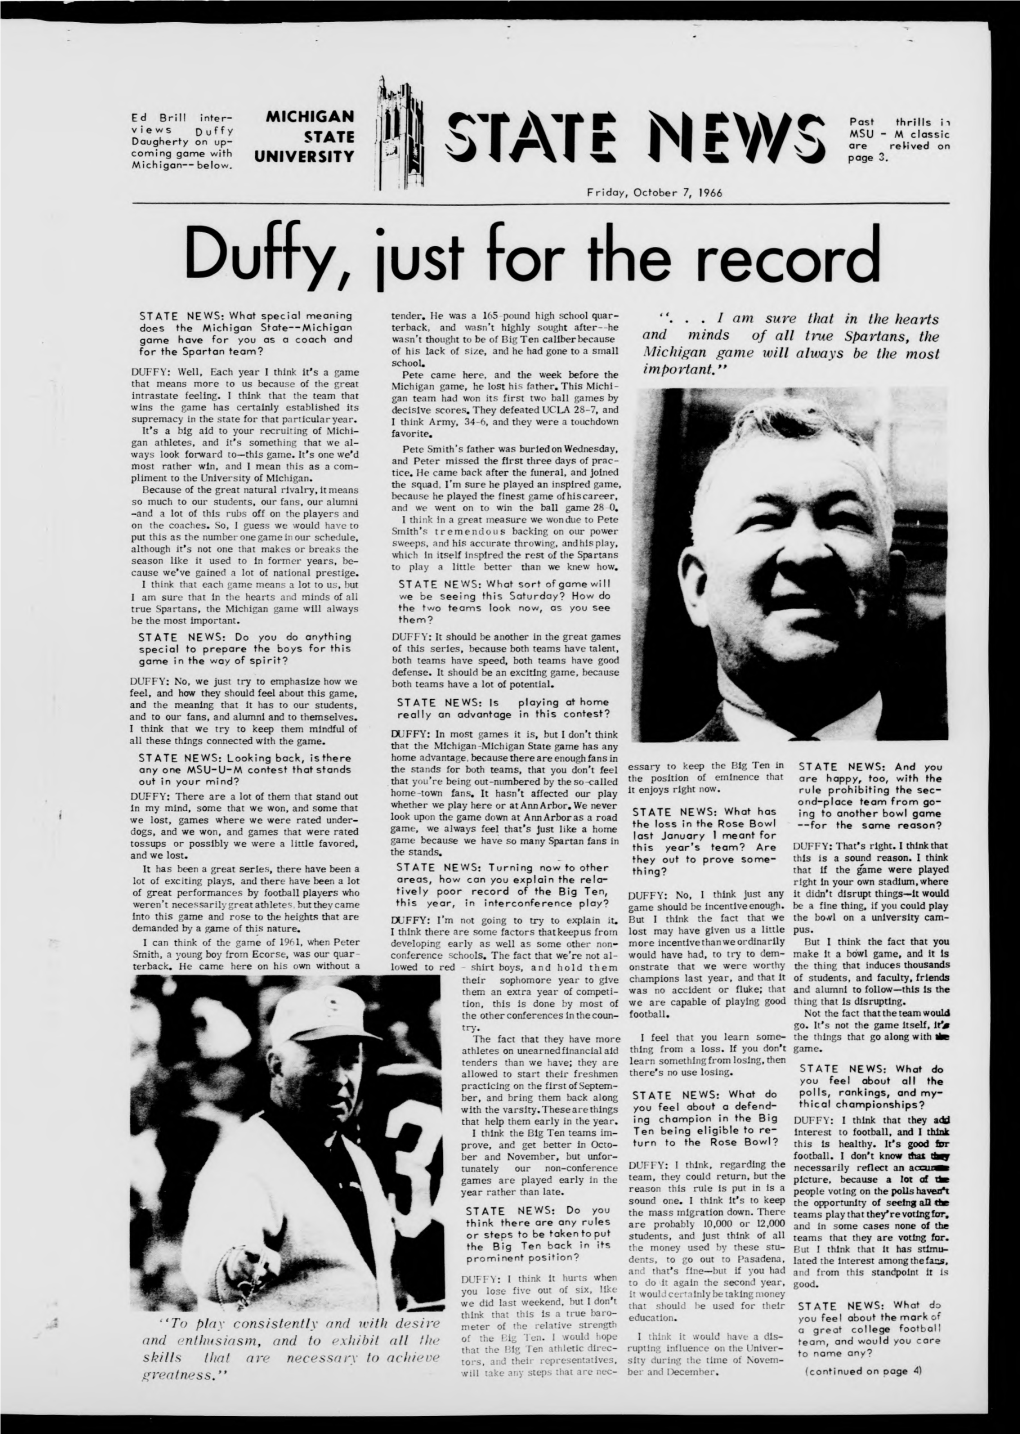 Duffy STATE MSU - M Classic Daugherty on Up­ Are Revived on Coming Game with UNIVERSITY Page 3